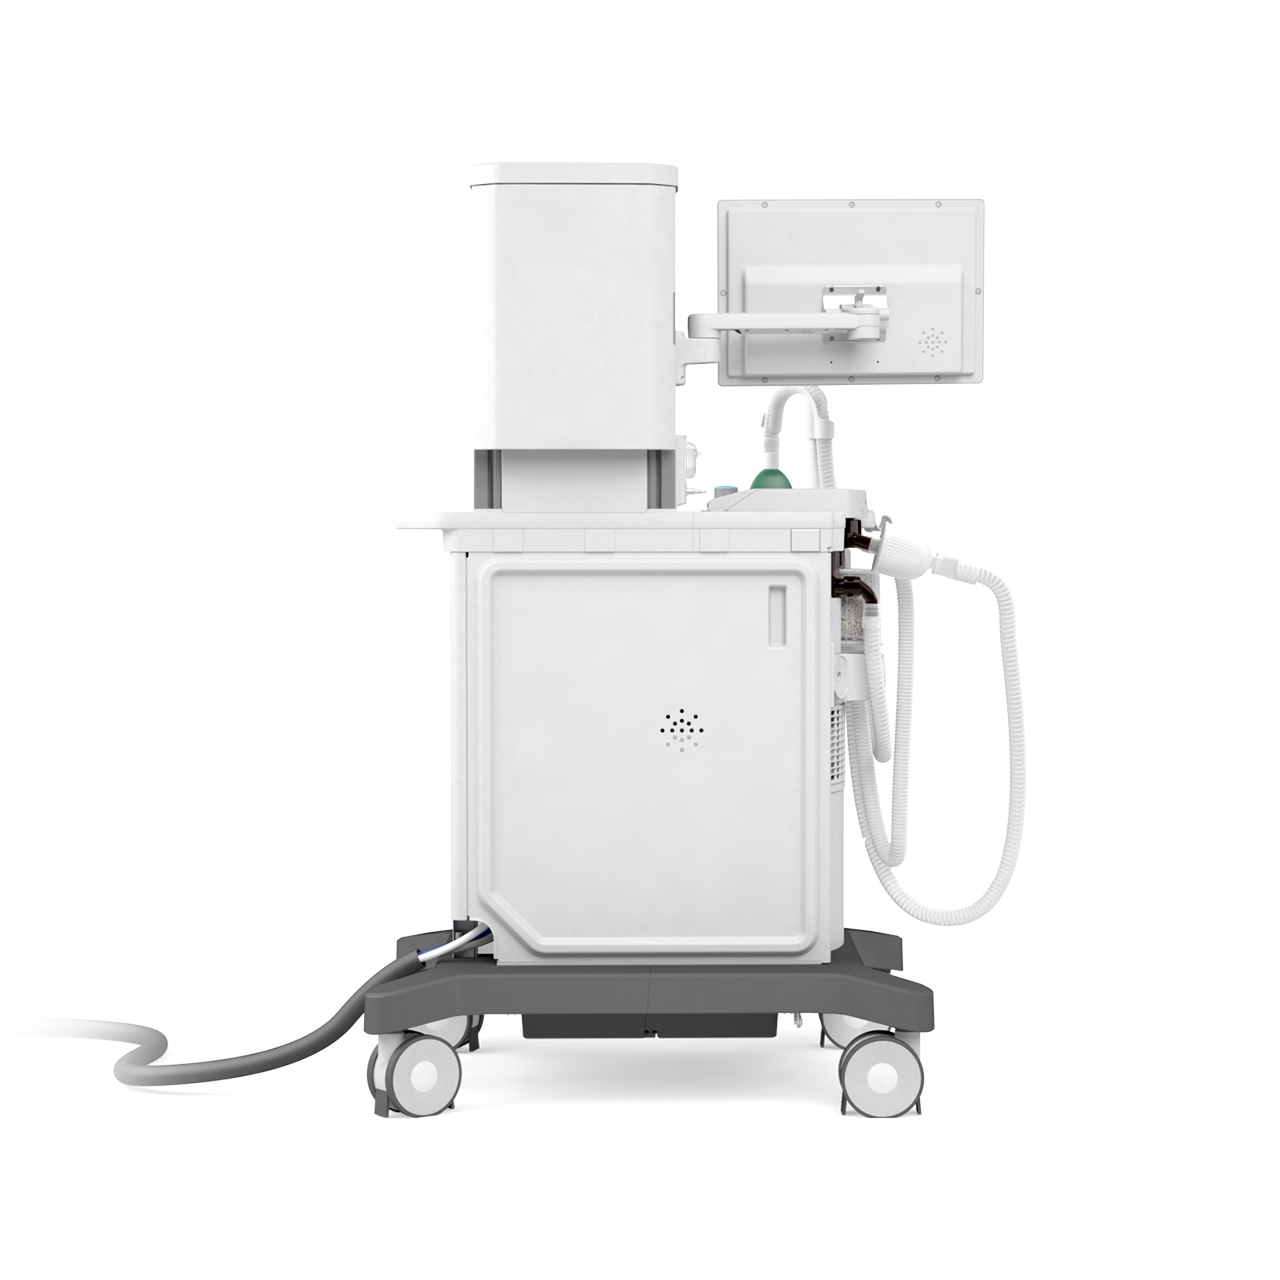 Our compact anesthesia machine, Getinge Flow-c , offers cable management without clutter designed for the crowded OR